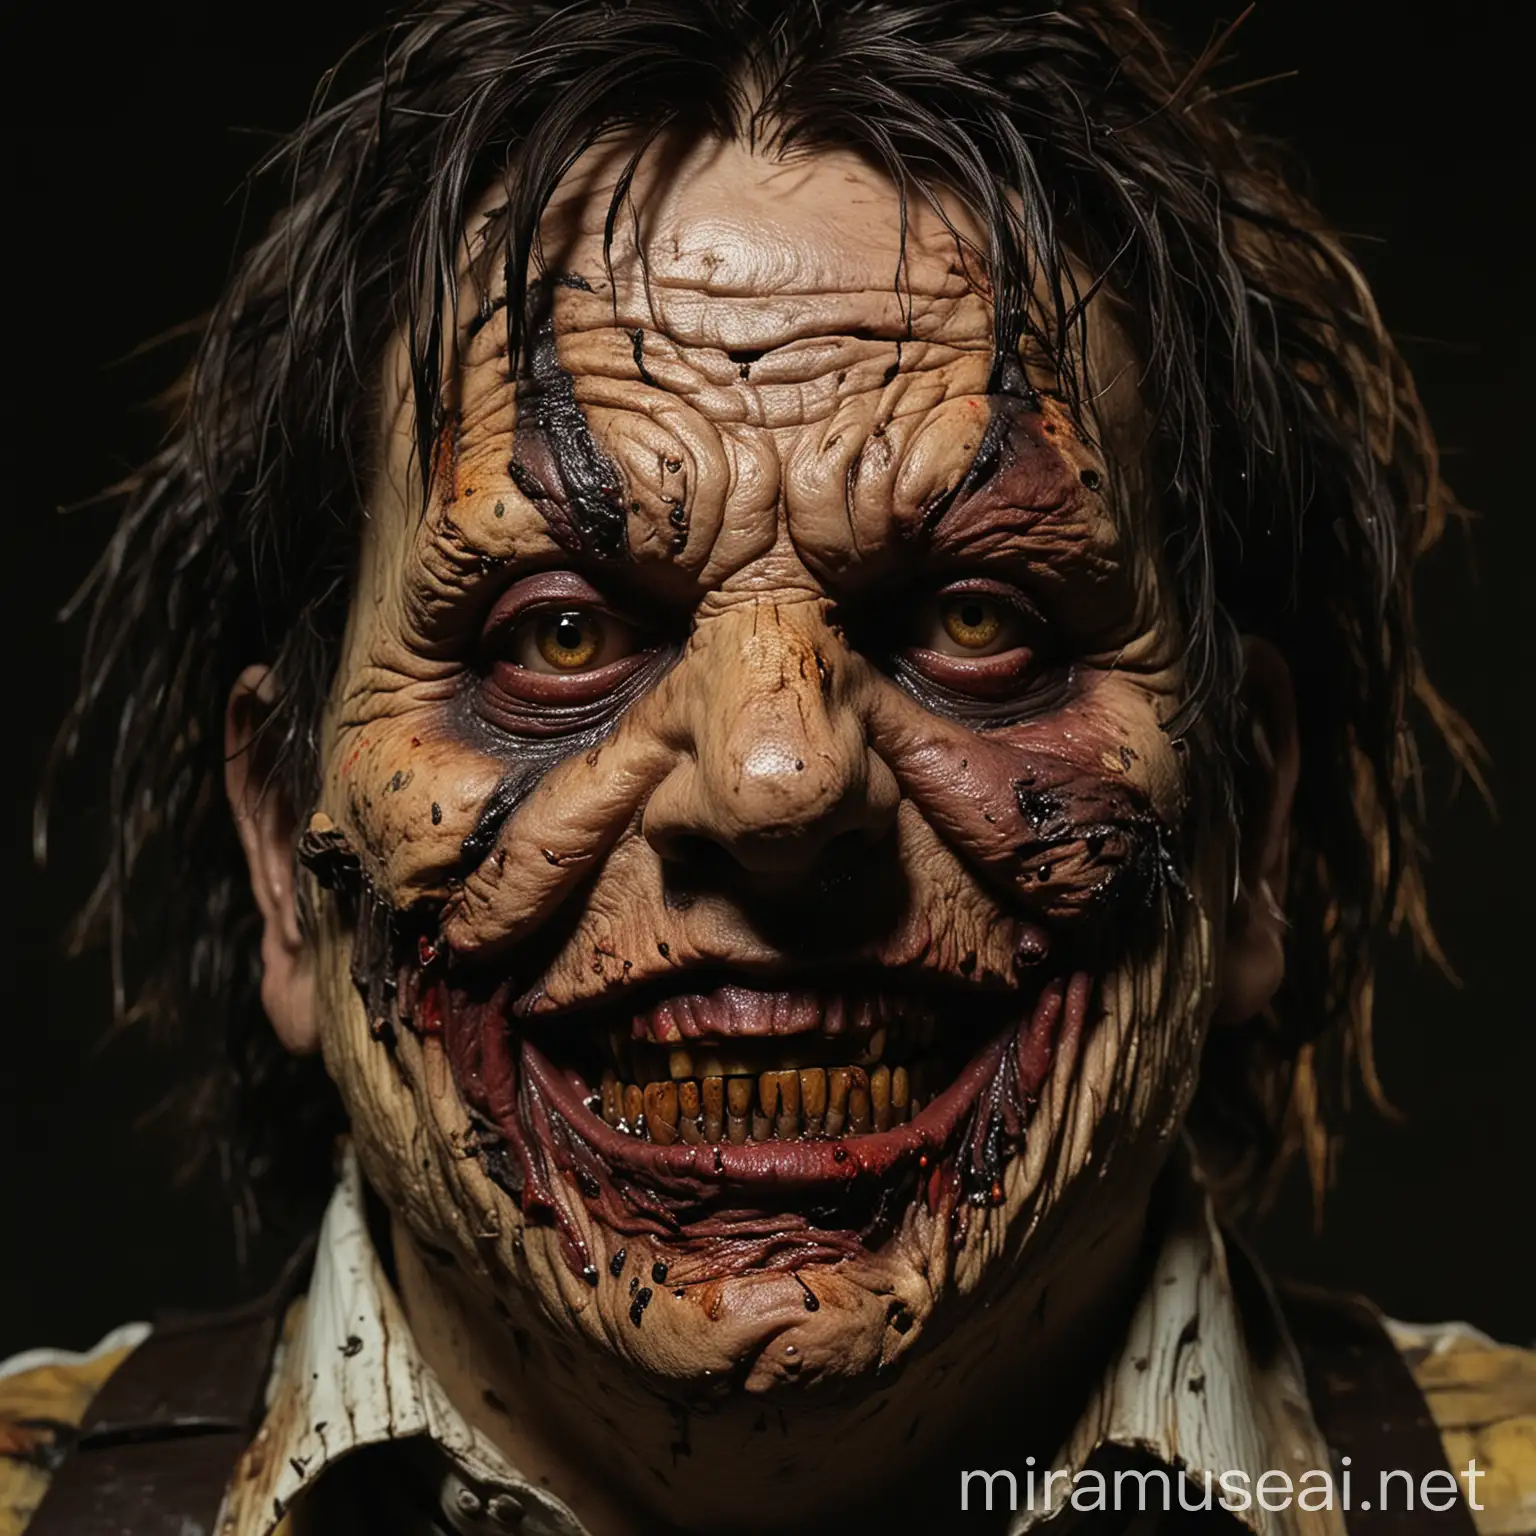 Psychedelic Leatherface Distorted Horror Portrait with Deep Gore